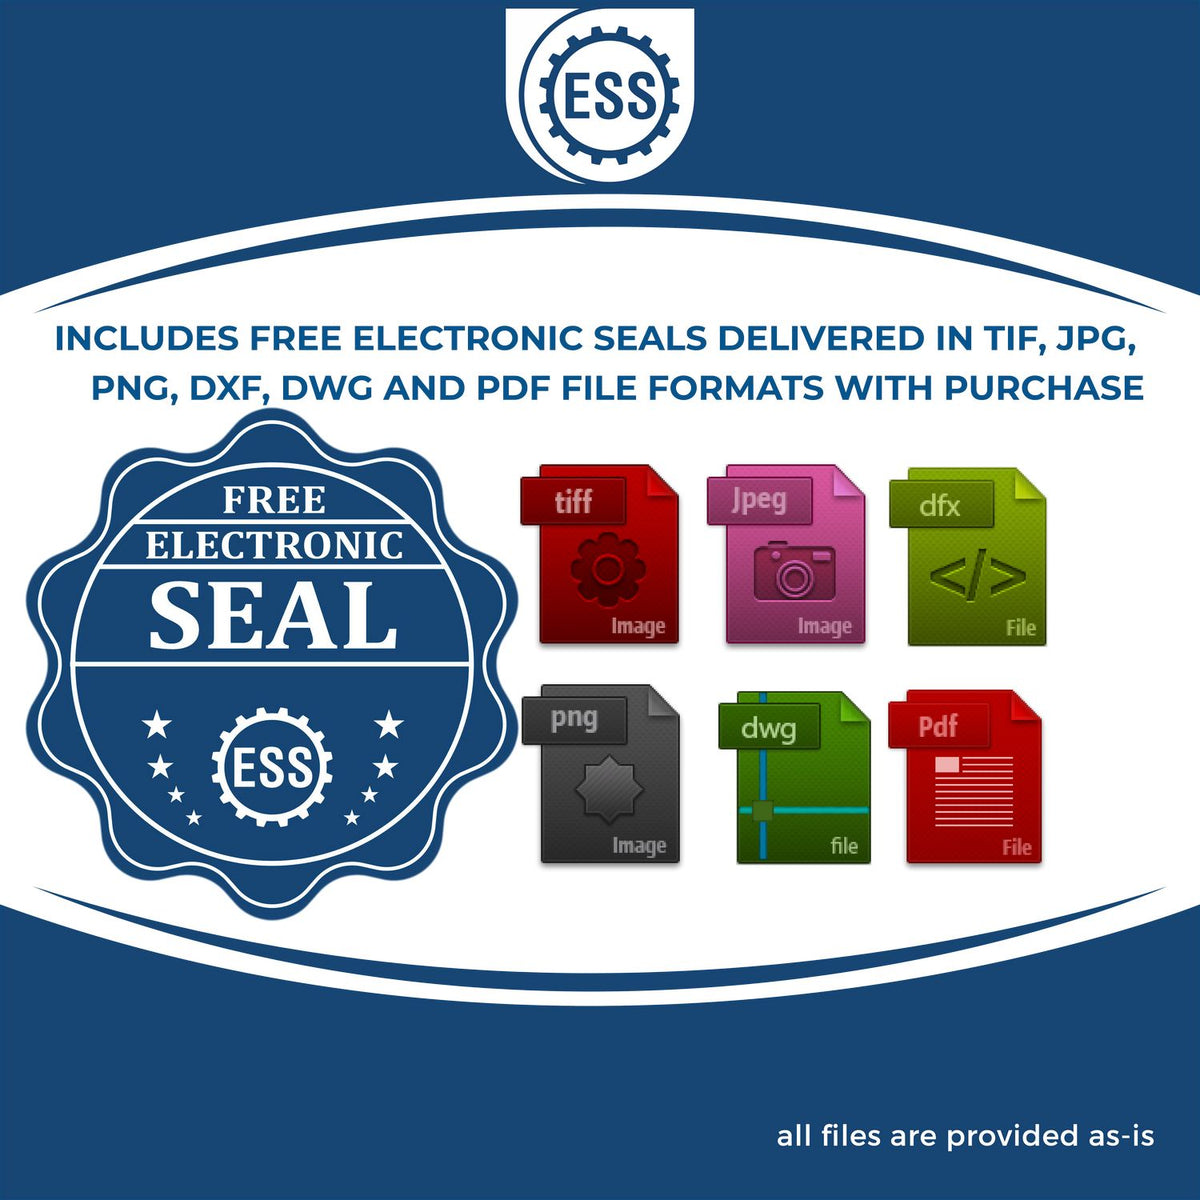 An infographic for the free electronic seal for the Gift Montana Landscape Architect Seal illustrating the different file type icons such as DXF, DWG, TIF, JPG and PNG.